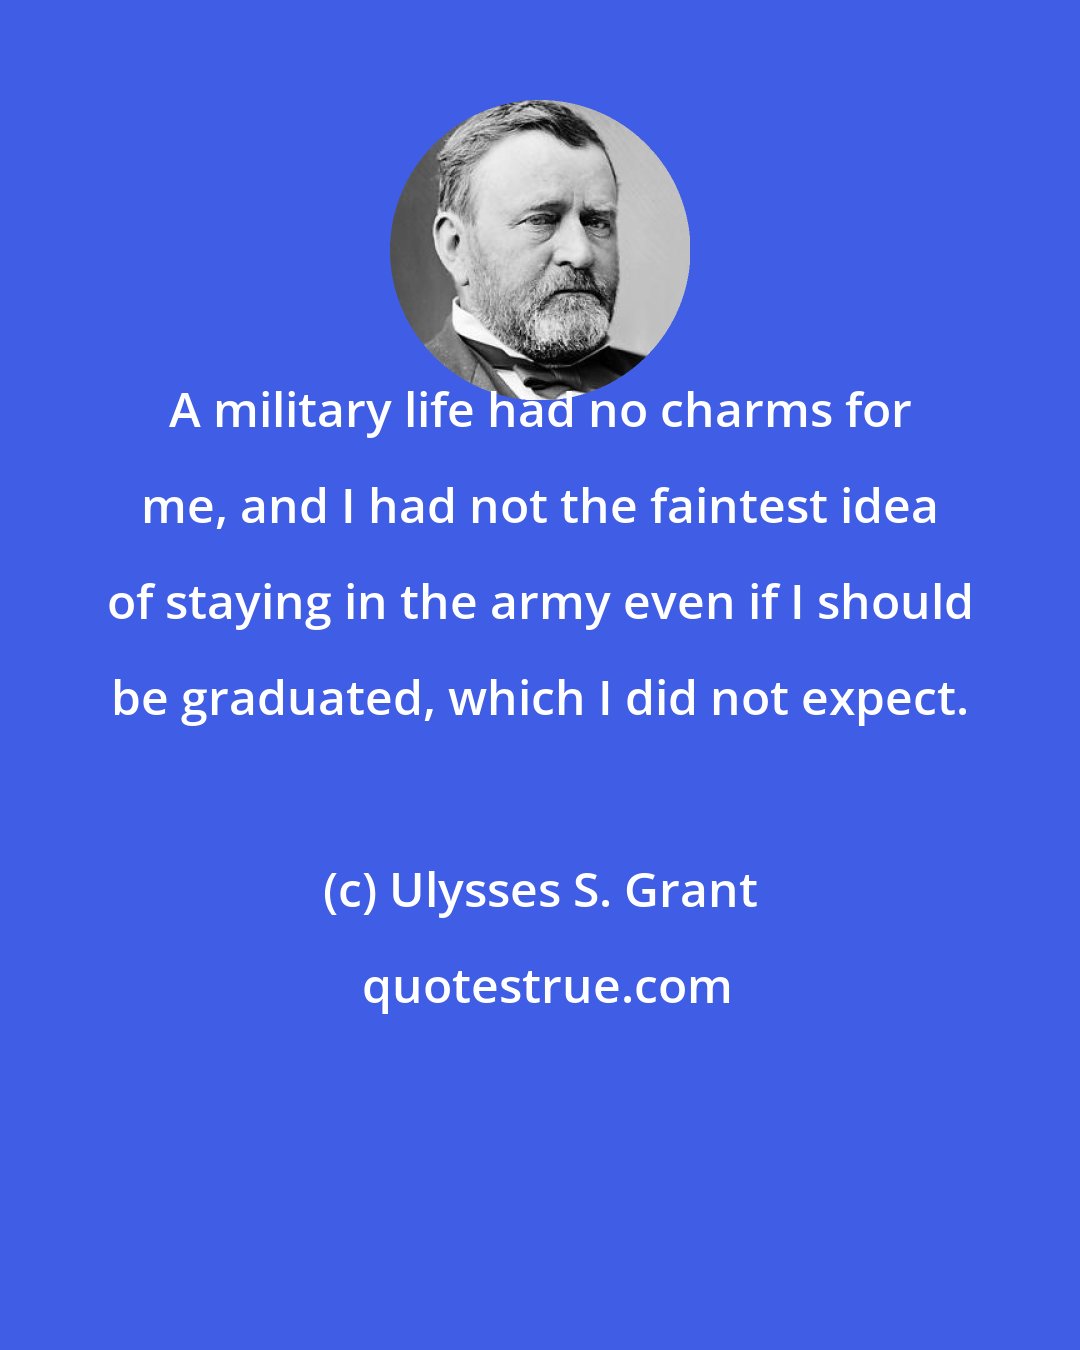 Ulysses S. Grant: A military life had no charms for me, and I had not the faintest idea of staying in the army even if I should be graduated, which I did not expect.